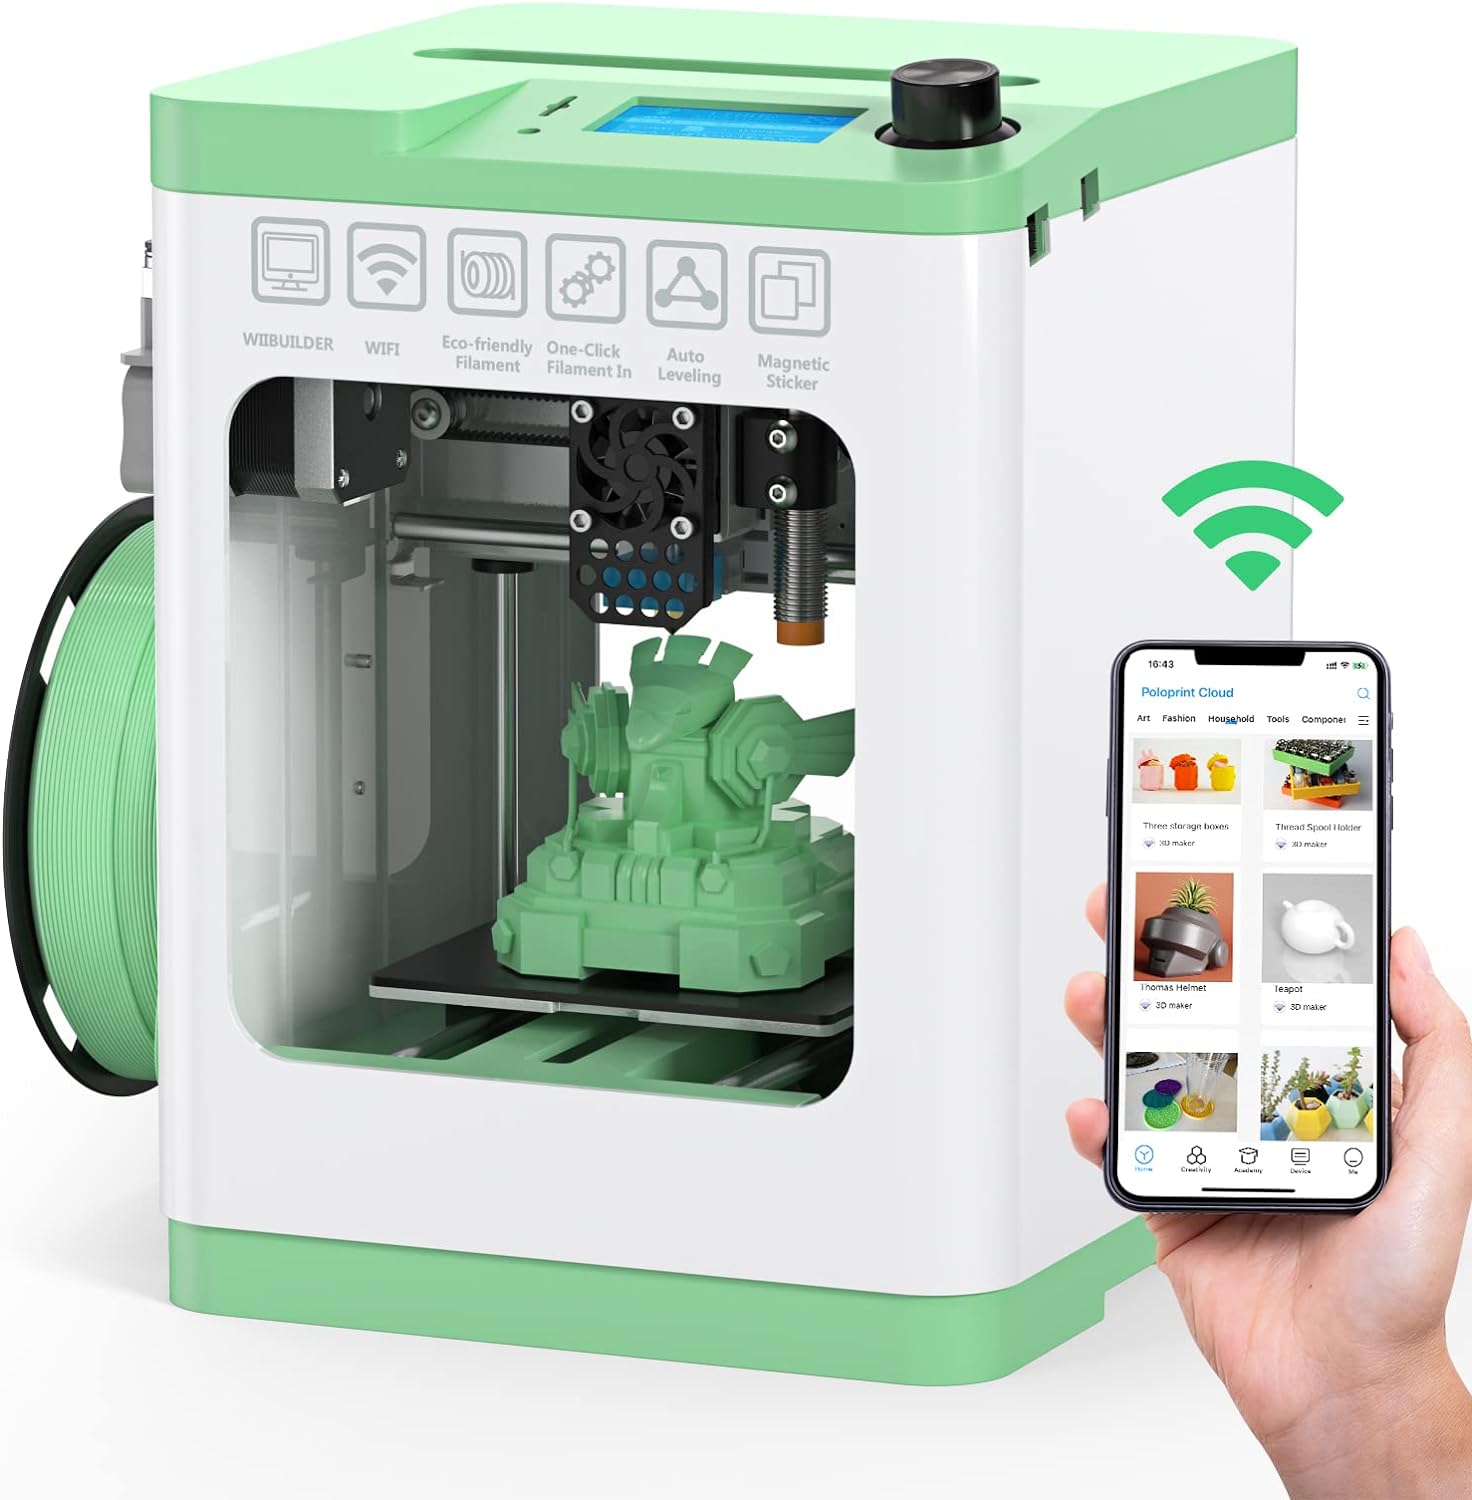 tina2s-3d-printers-with-wi-fi-cloud-printing-fully-assembled-and-auto-leveling-mini-3d-printer-for-beginners-high-precis Tina2S 3D Printer Review